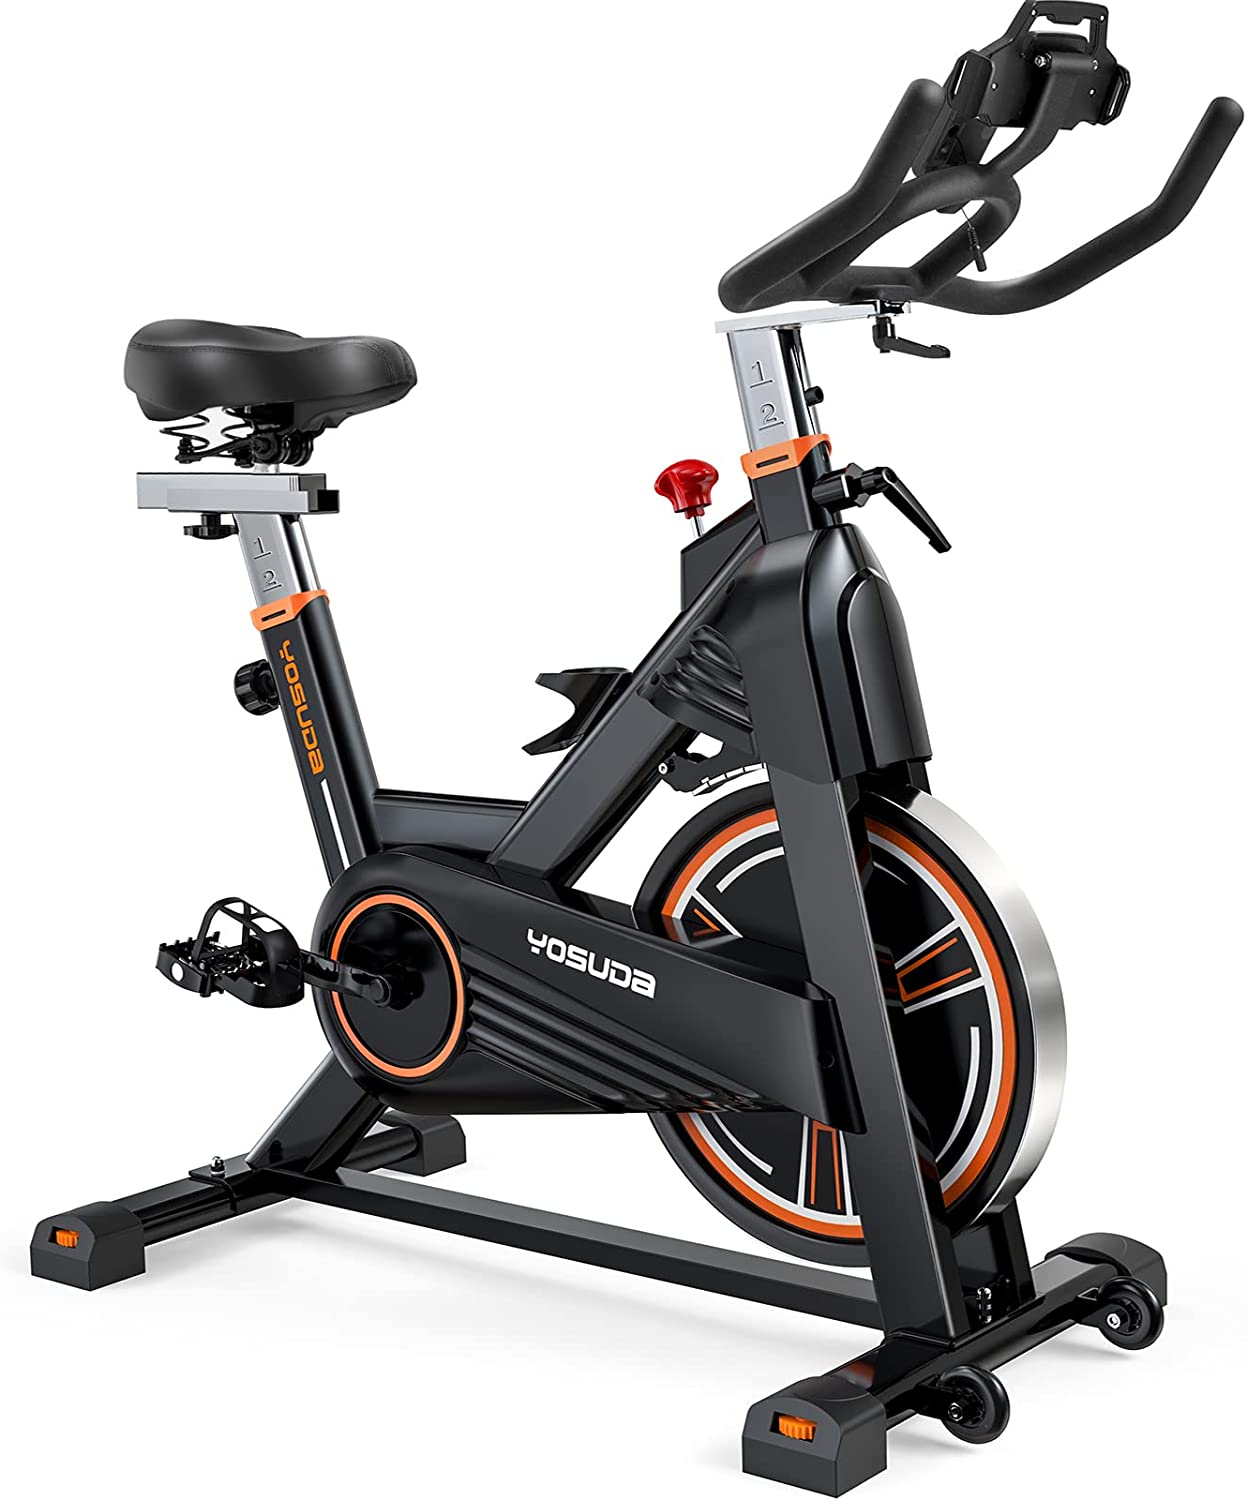 YOSUDA PRO Magnetic Exercise Bike 350 lbs 010C/Indoor Cycling Bike Stationary Bike 007A 330 lbs for Home Gym with Comfortable Seat Cushion